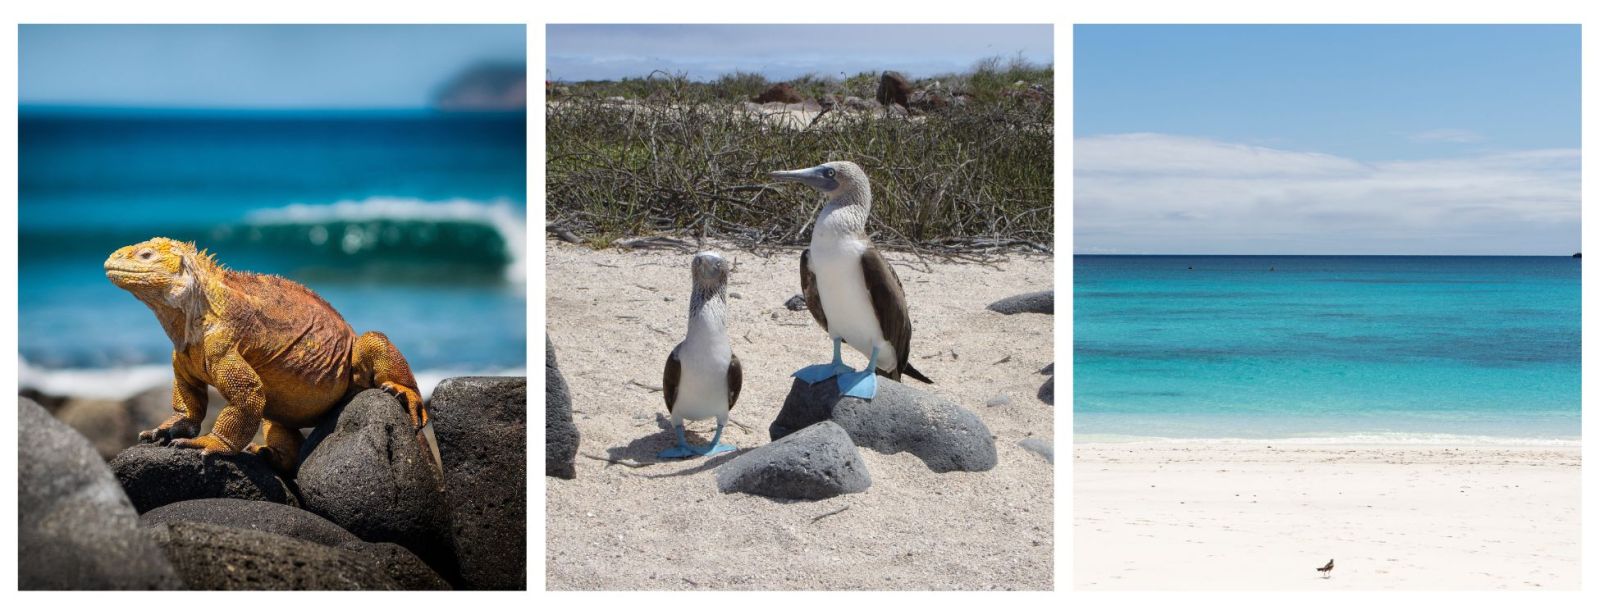 Wildlife Of The Galapagos. Escorted Tours To The Galapagos